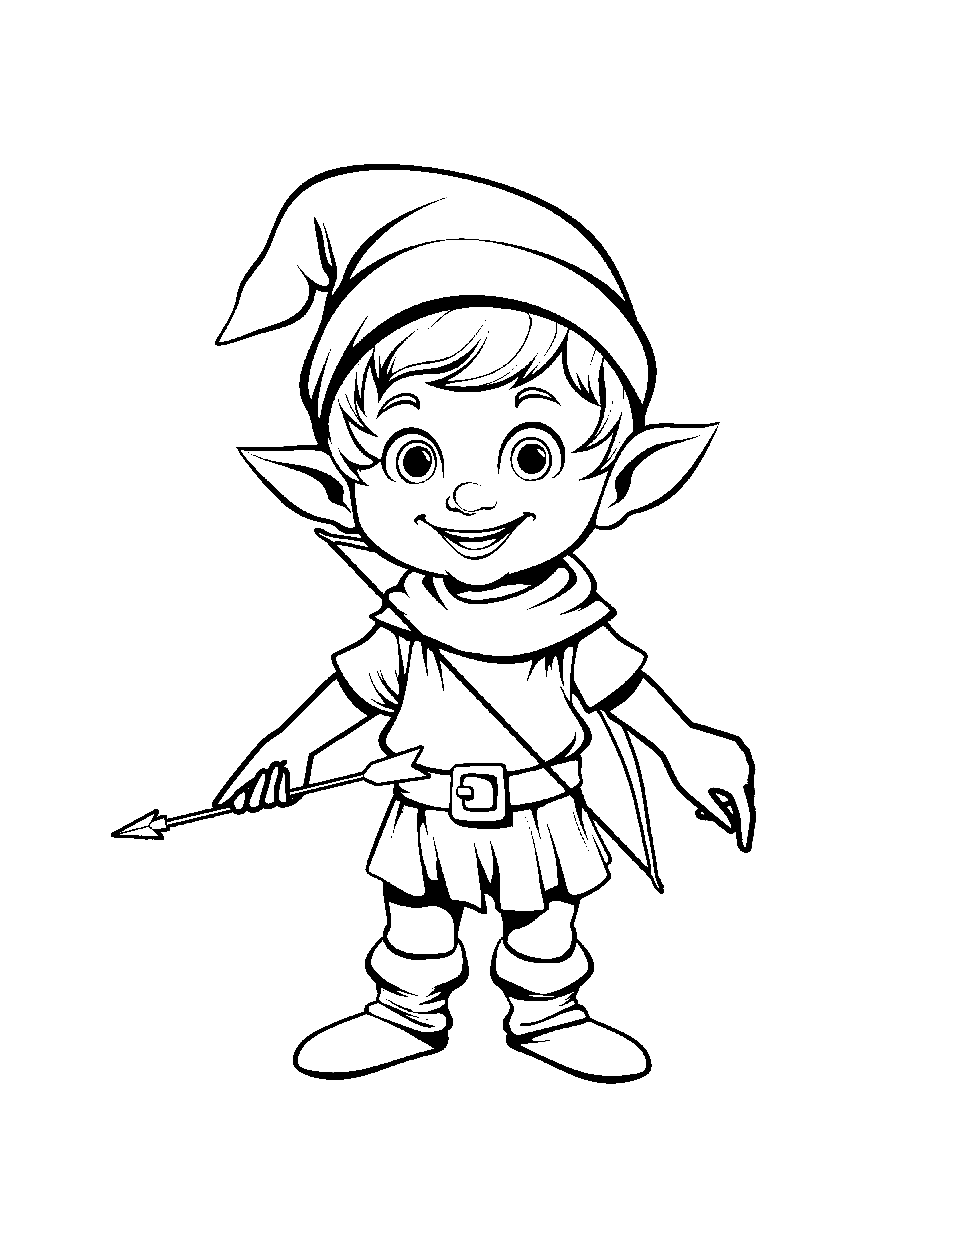 Elf Archer Coloring Page - A male elf with a bow and arrow.